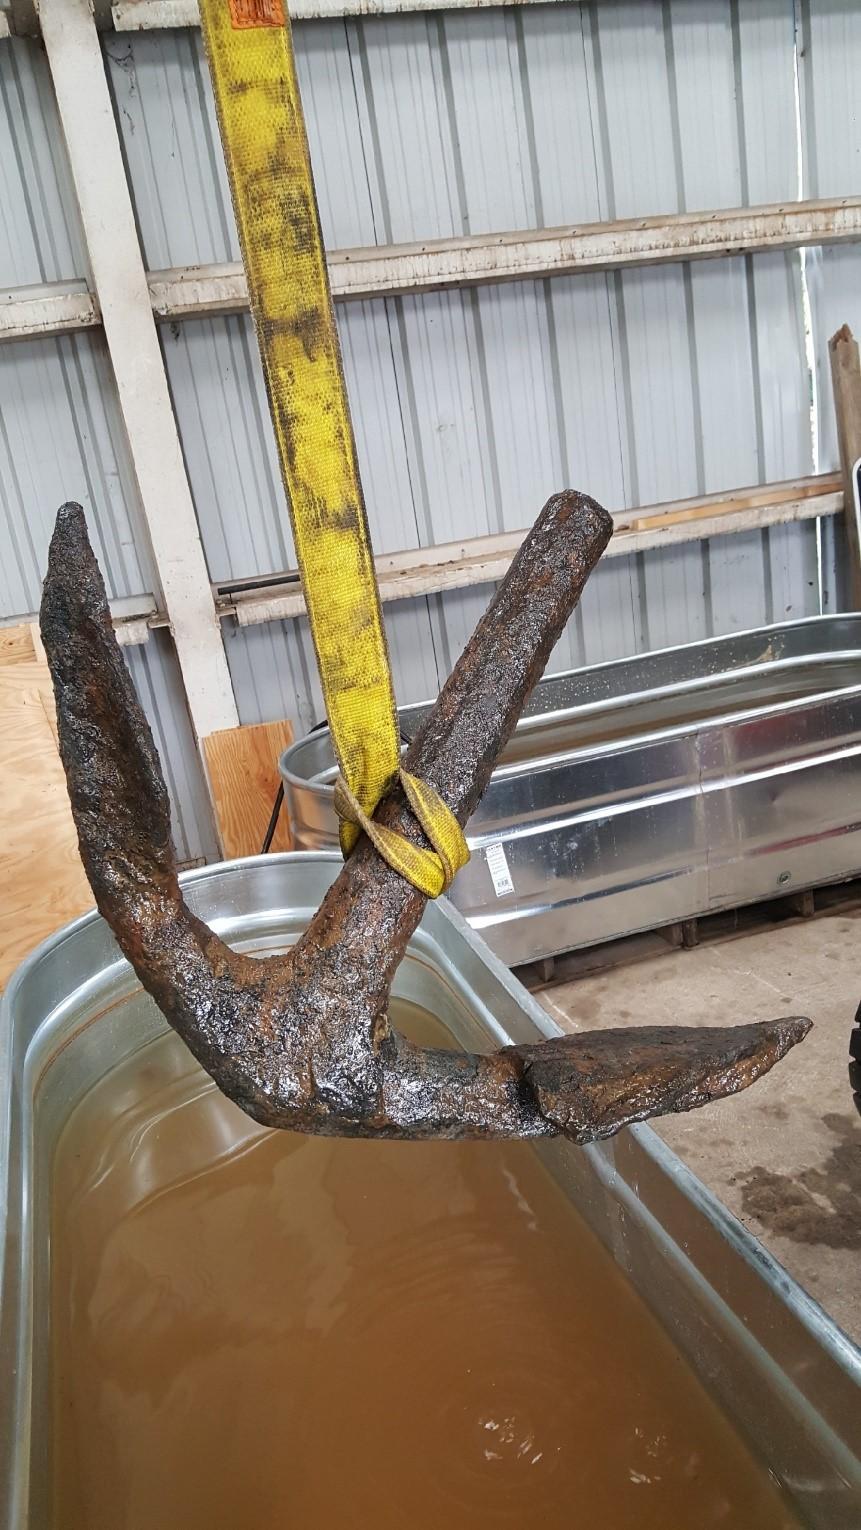 An anchor removed from the Savannah River during the week of Feb. 22. (Courtesy of <a href="https://www.sas.usace.army.mil/Media/News-Releases/Article/2526789/army-corps-of-engineers-releases-photos-of-artifacts-found-in-the-savannah-river/">Savannah District, U.S. Army Corps of Engineers</a>)